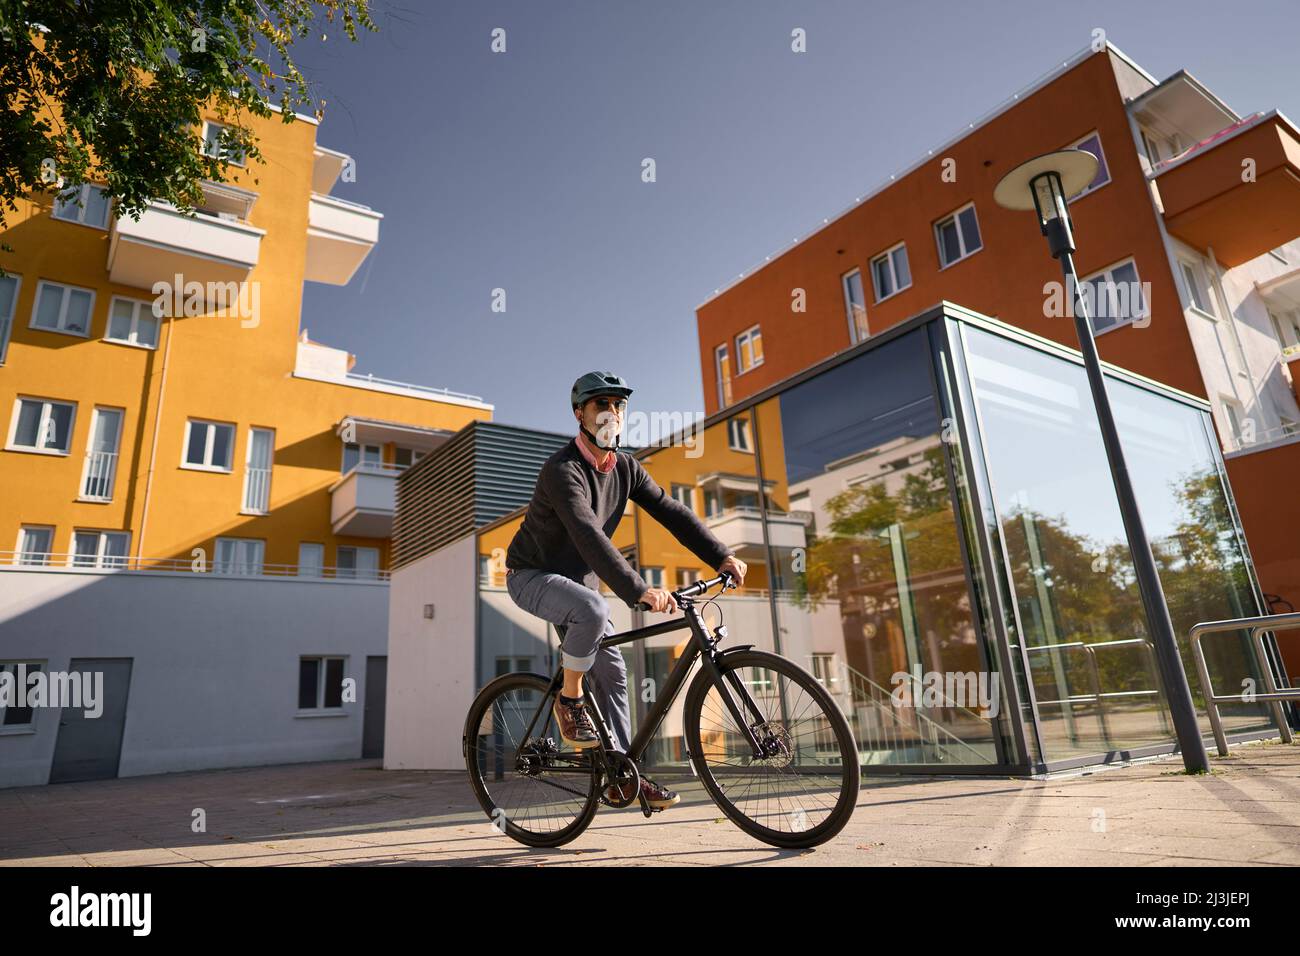 middle-aged man on bicycle, urban, Munich, Germany Stock Photo